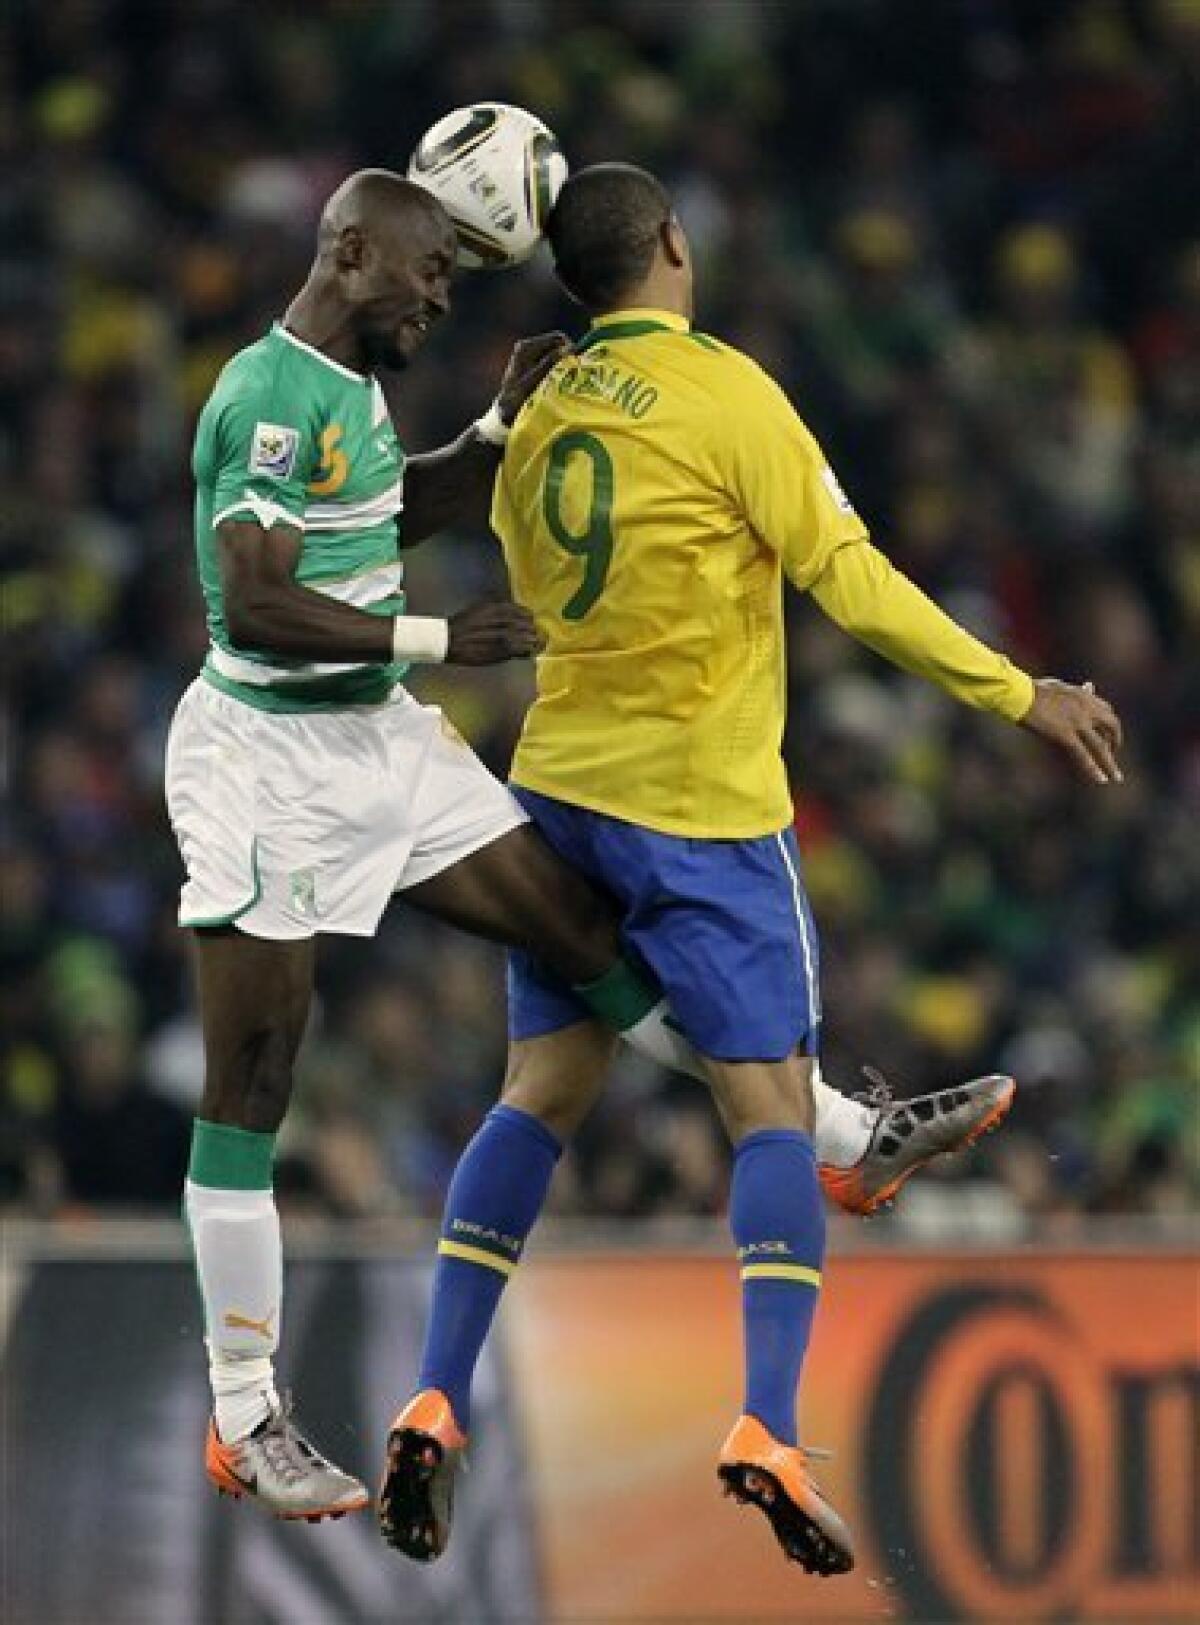 Brazil's Luis Fabiano, right, and Ivory Coast's Didier Zokora, left, compete for the ball during the World Cup group G soccer match between Brazil and Ivory Coast at Soccer City in Johannesburg, South Africa, Sunday, June 20, 2010. (AP Photo/Matt Dunham)